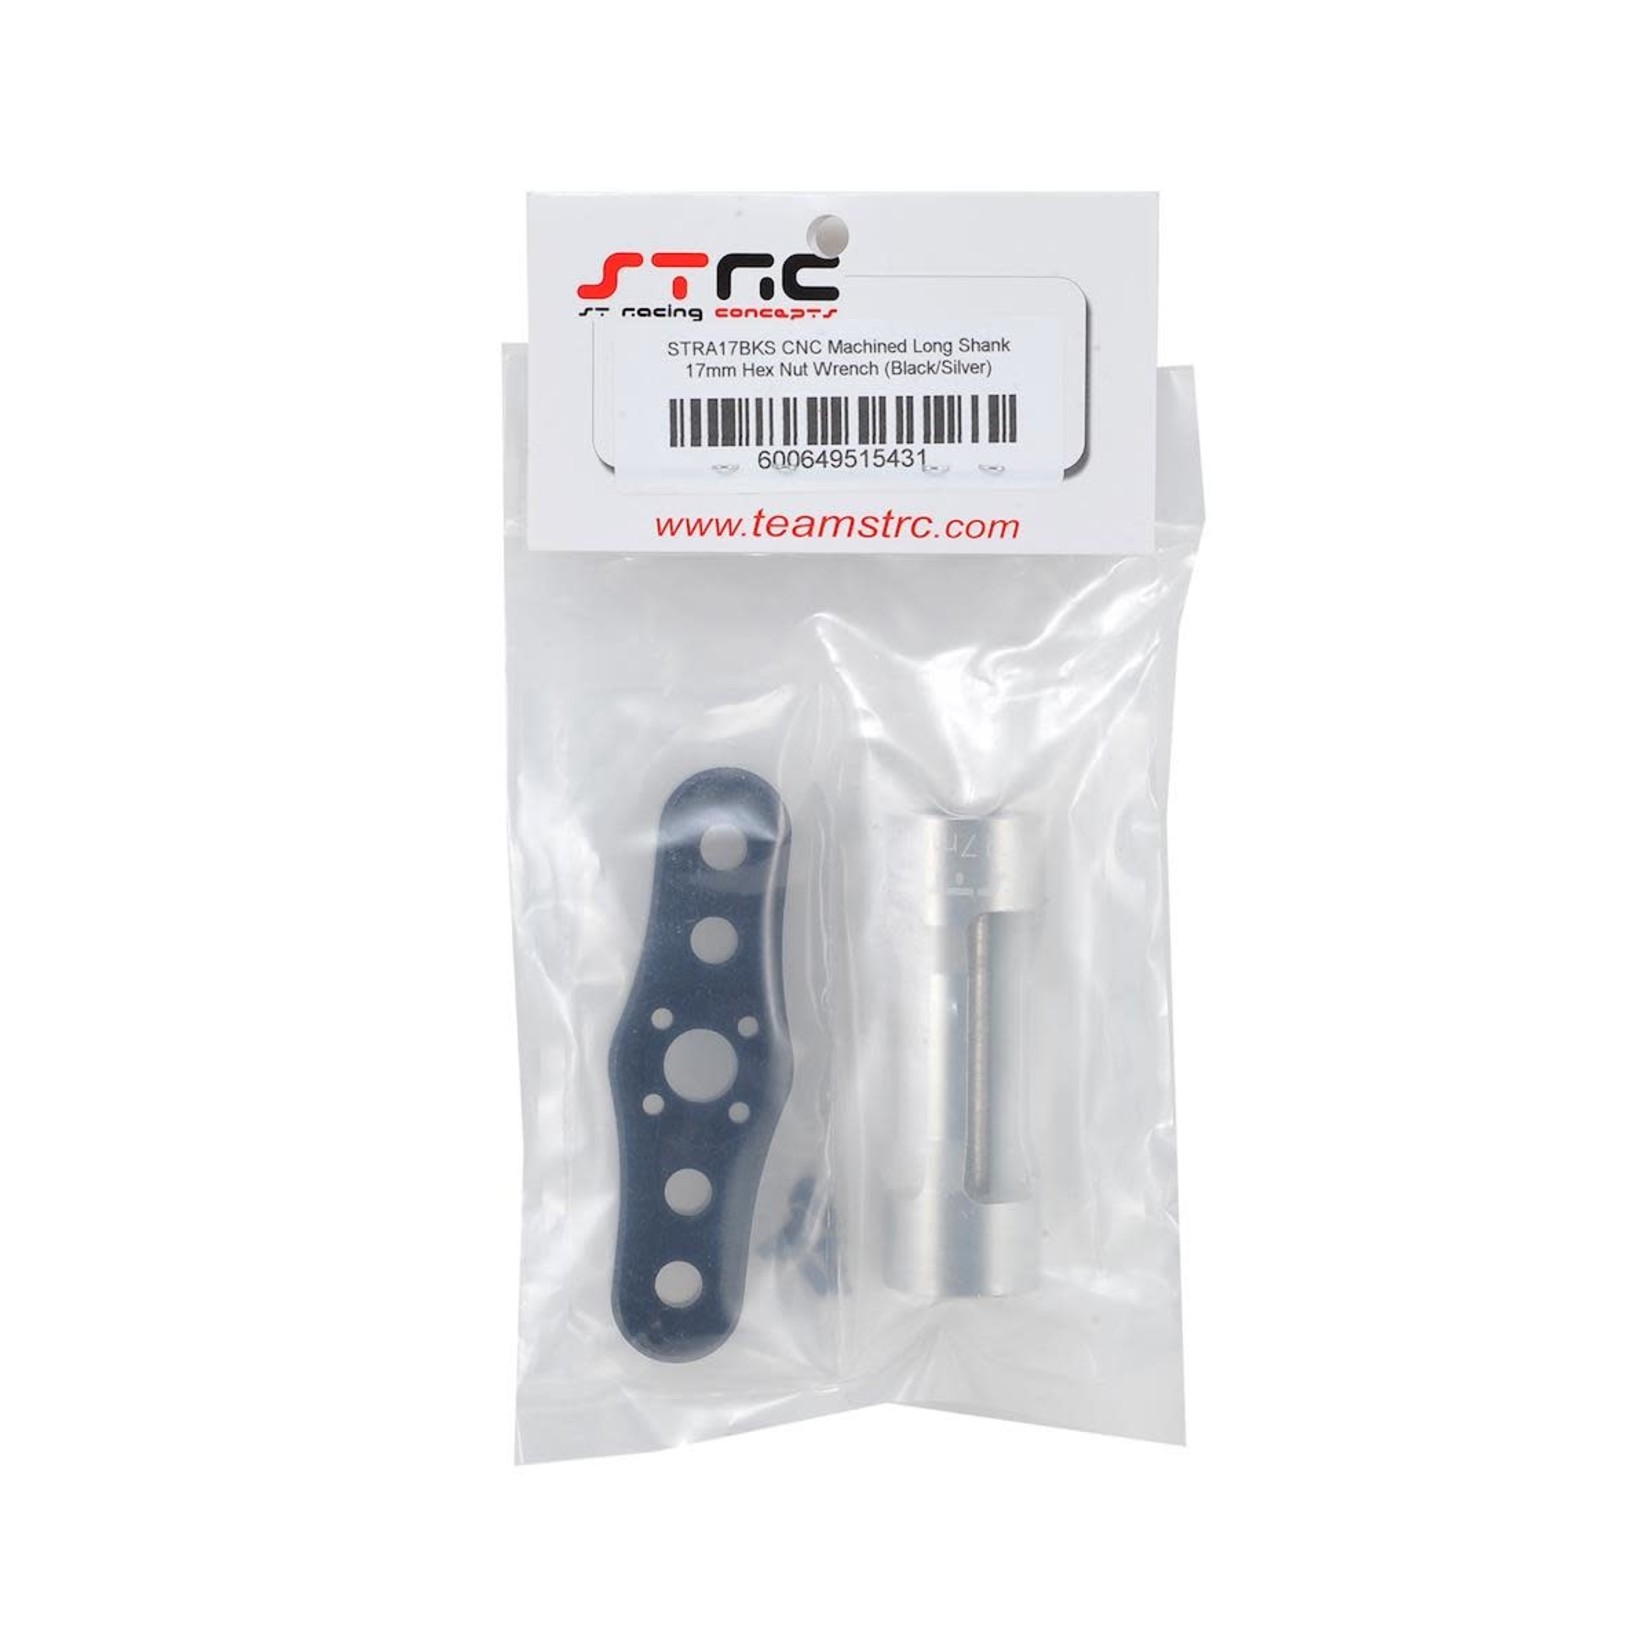 ST Racing Concepts ST Racing Concepts 17mm Light Weight T-Handle Wheel Wrench (Black/Silver) #STRA17BKS